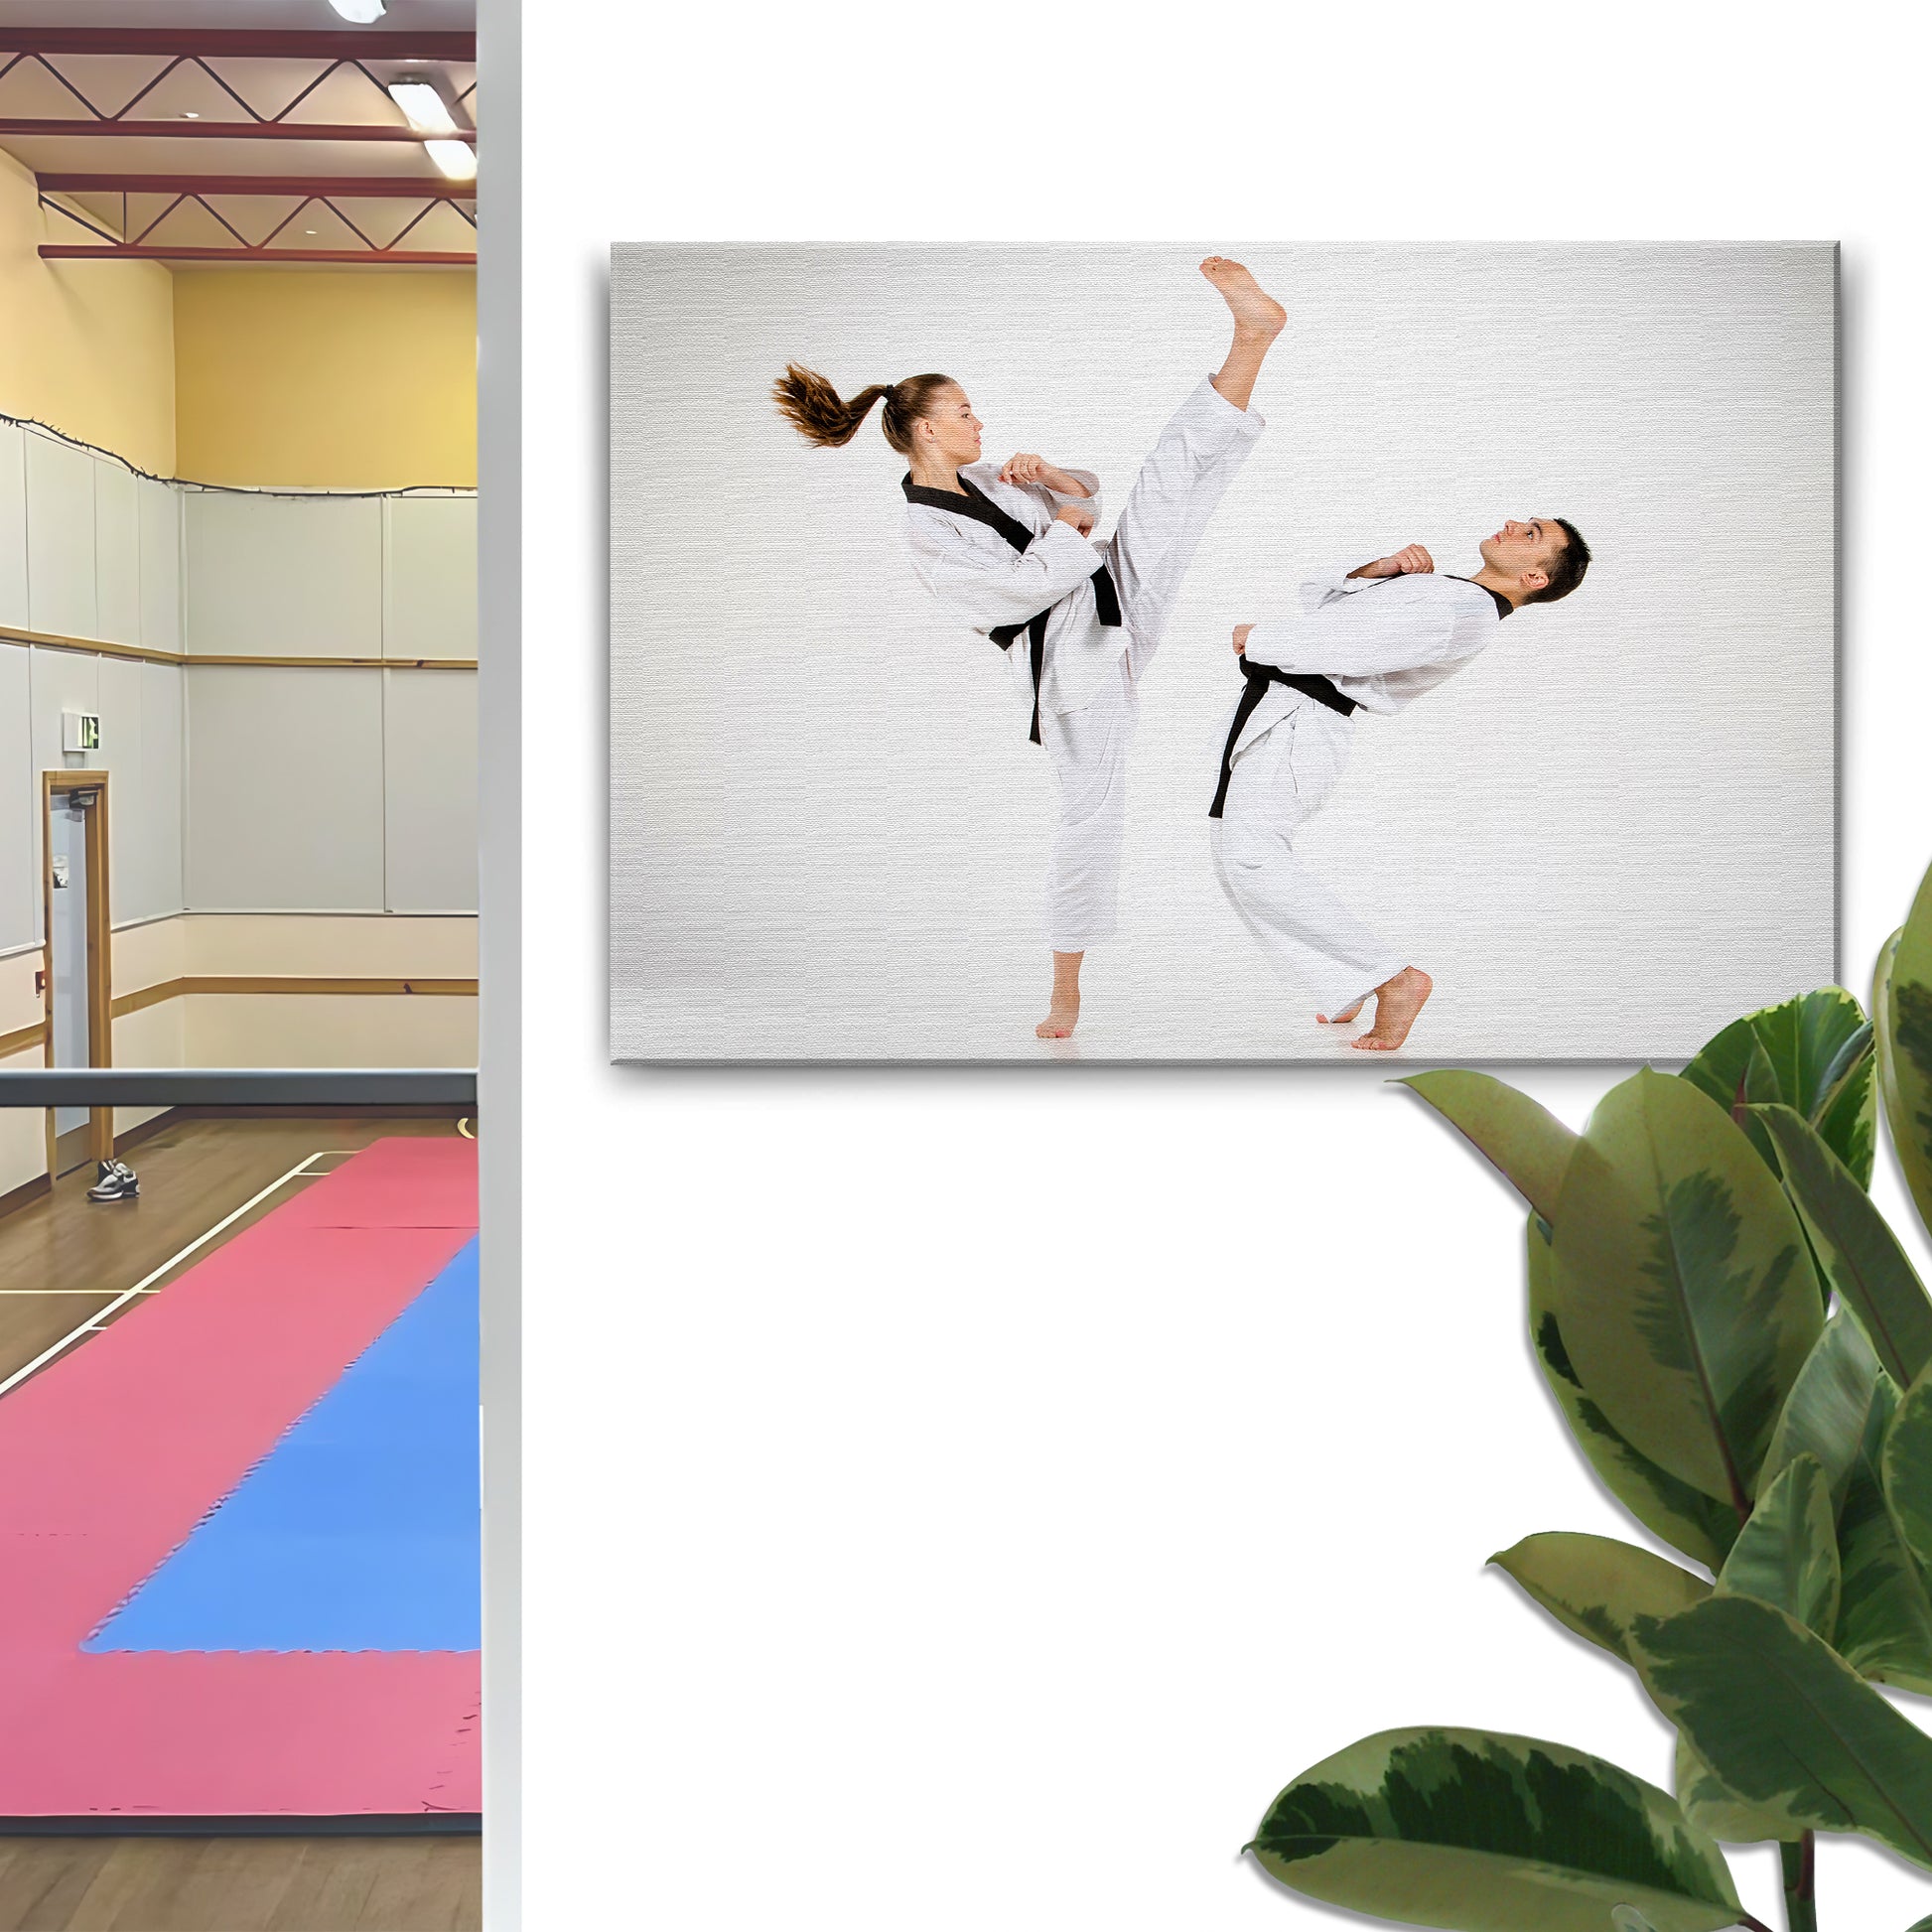 Taekwondo Kick Canvas Wall Art Style 1 - Image by Tailored Canvases